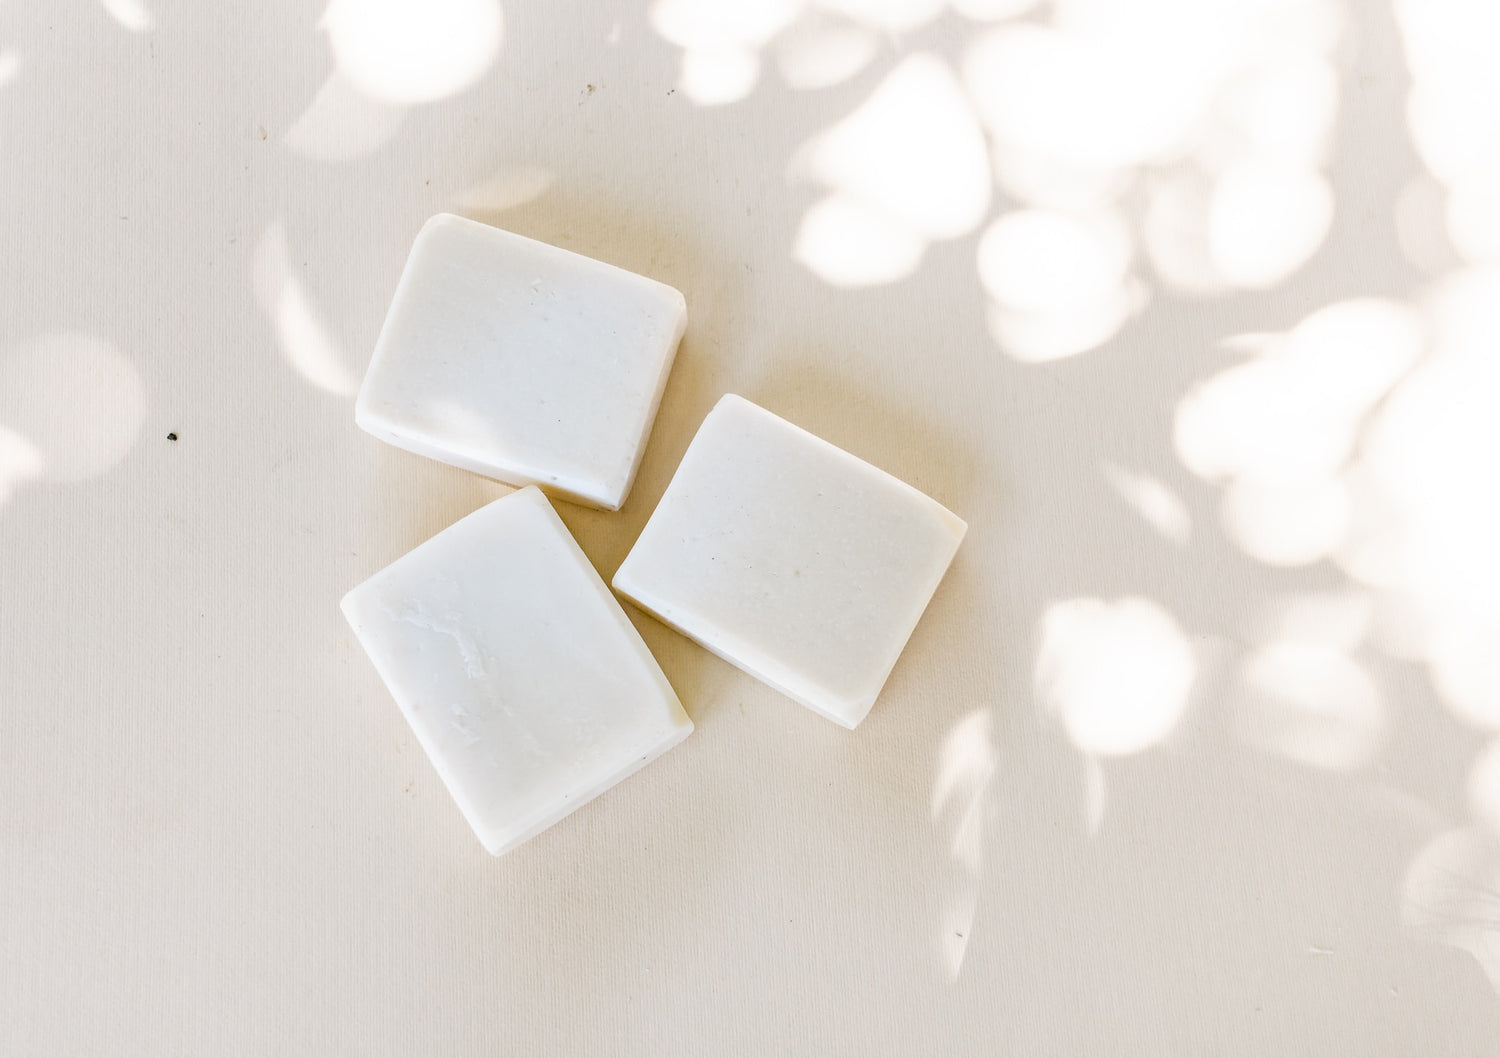 What are the Risks of Using Homemade Laundry Soap?